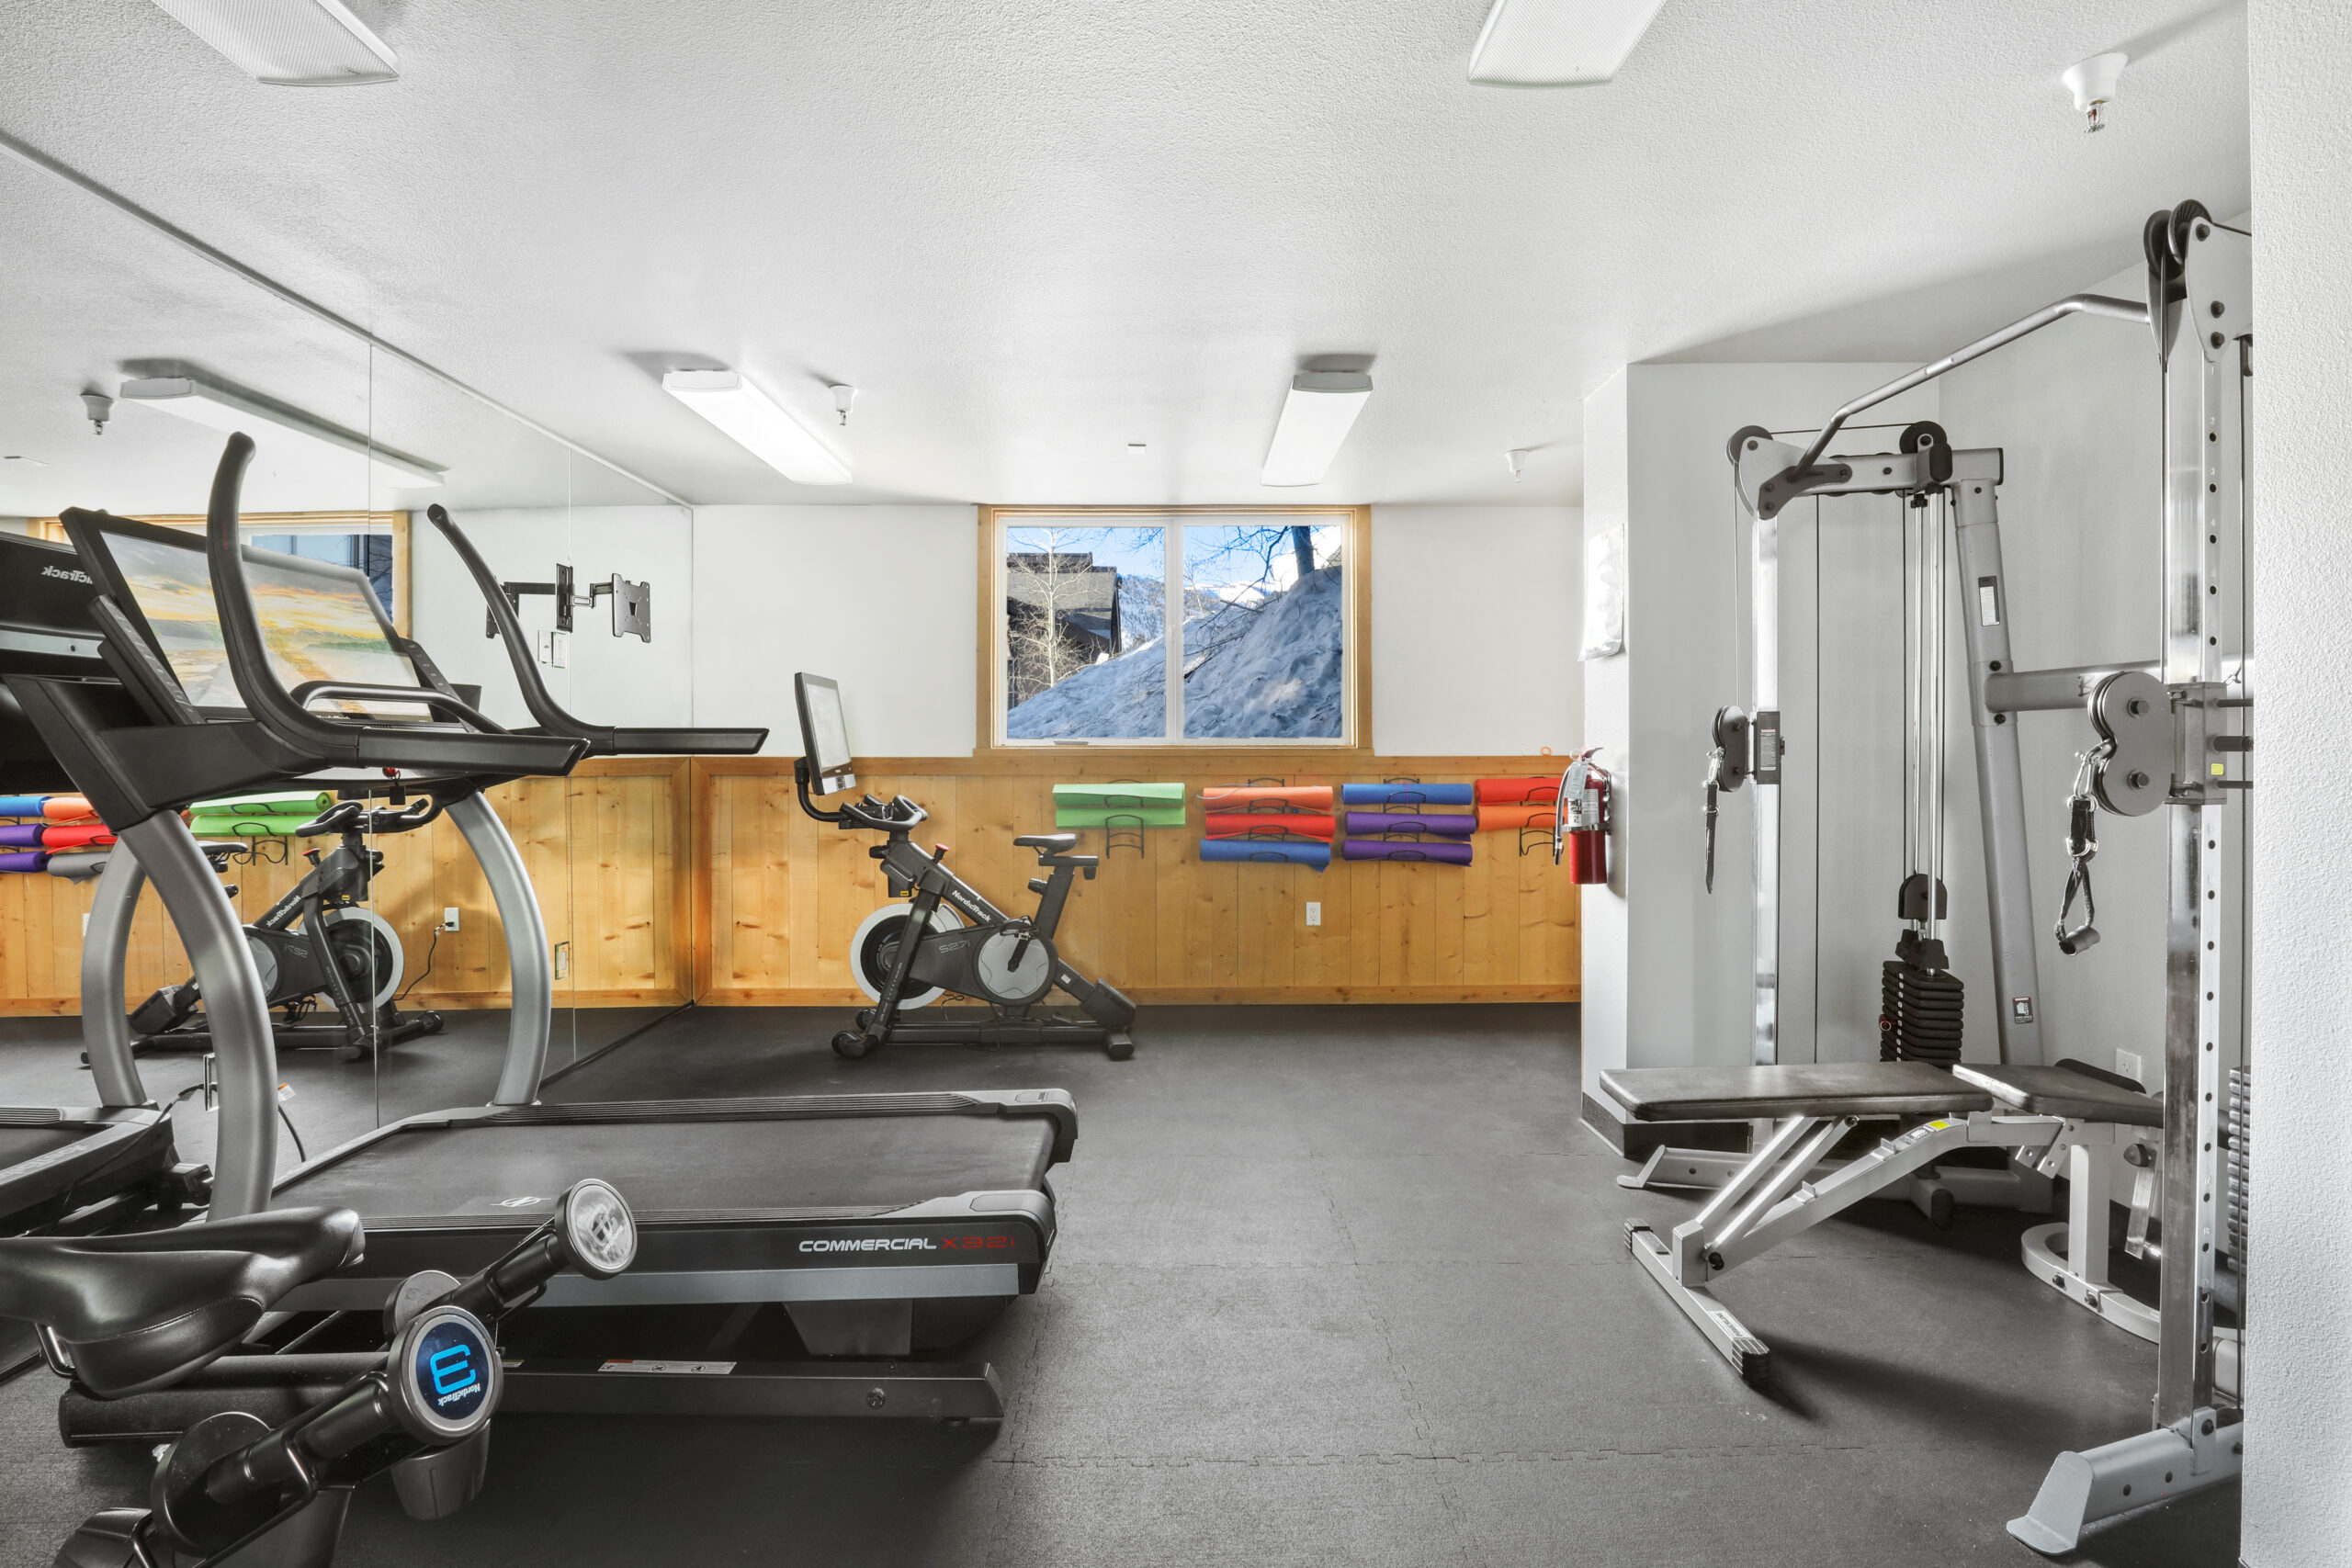 A photo displays a gym interior featuring a variety of exercise equipment.